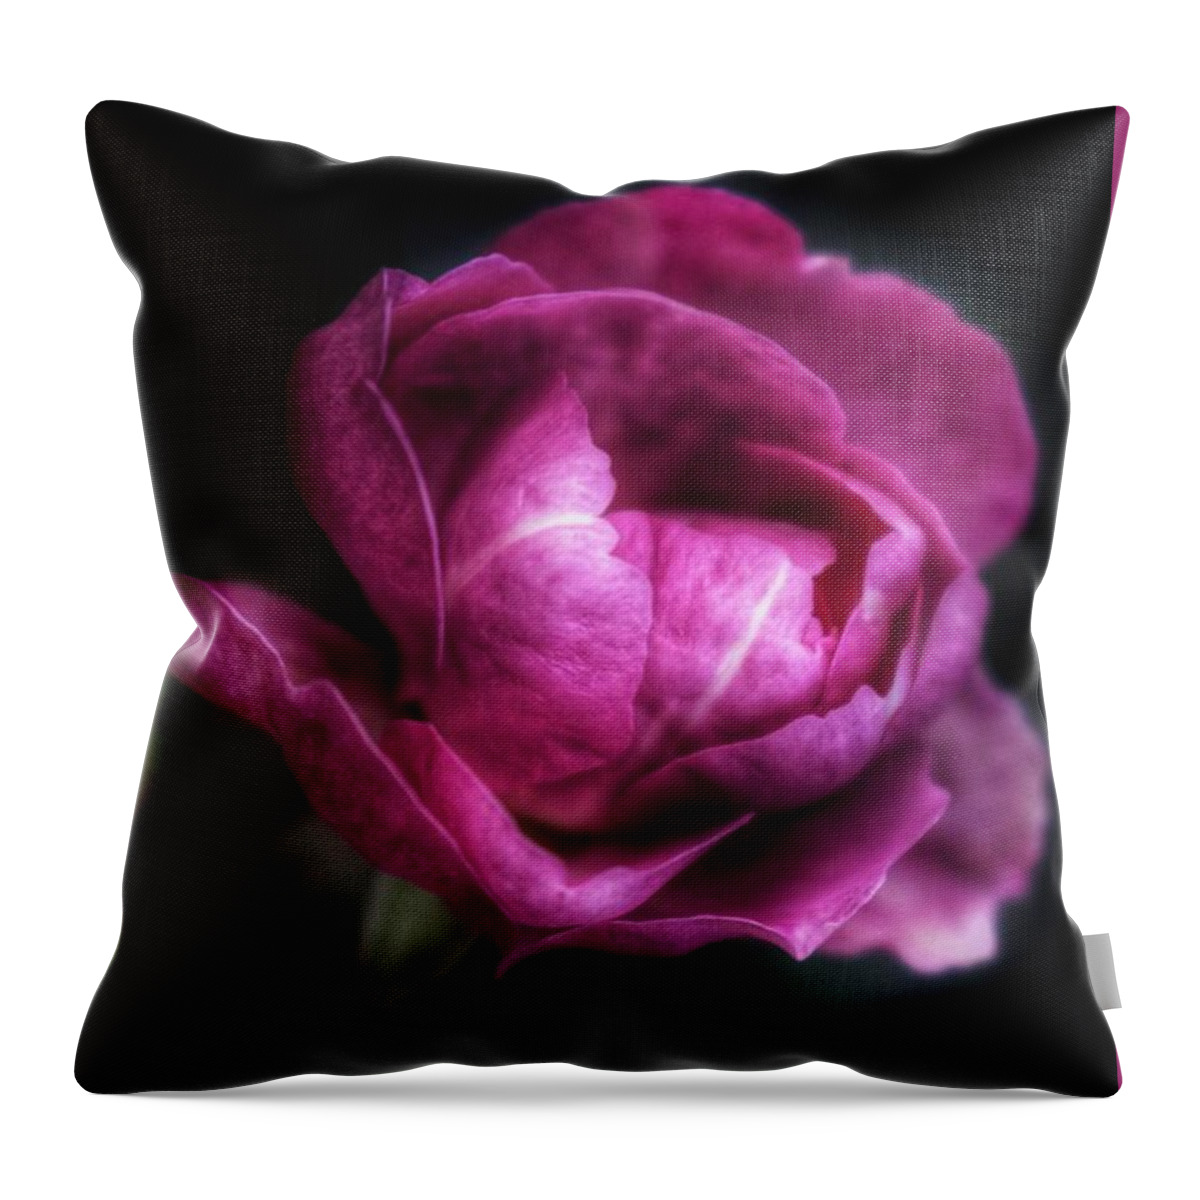 Florida Throw Pillow featuring the photograph Heirloom Treasure by Brenda Wilcox aka Wildeyed n Wicked